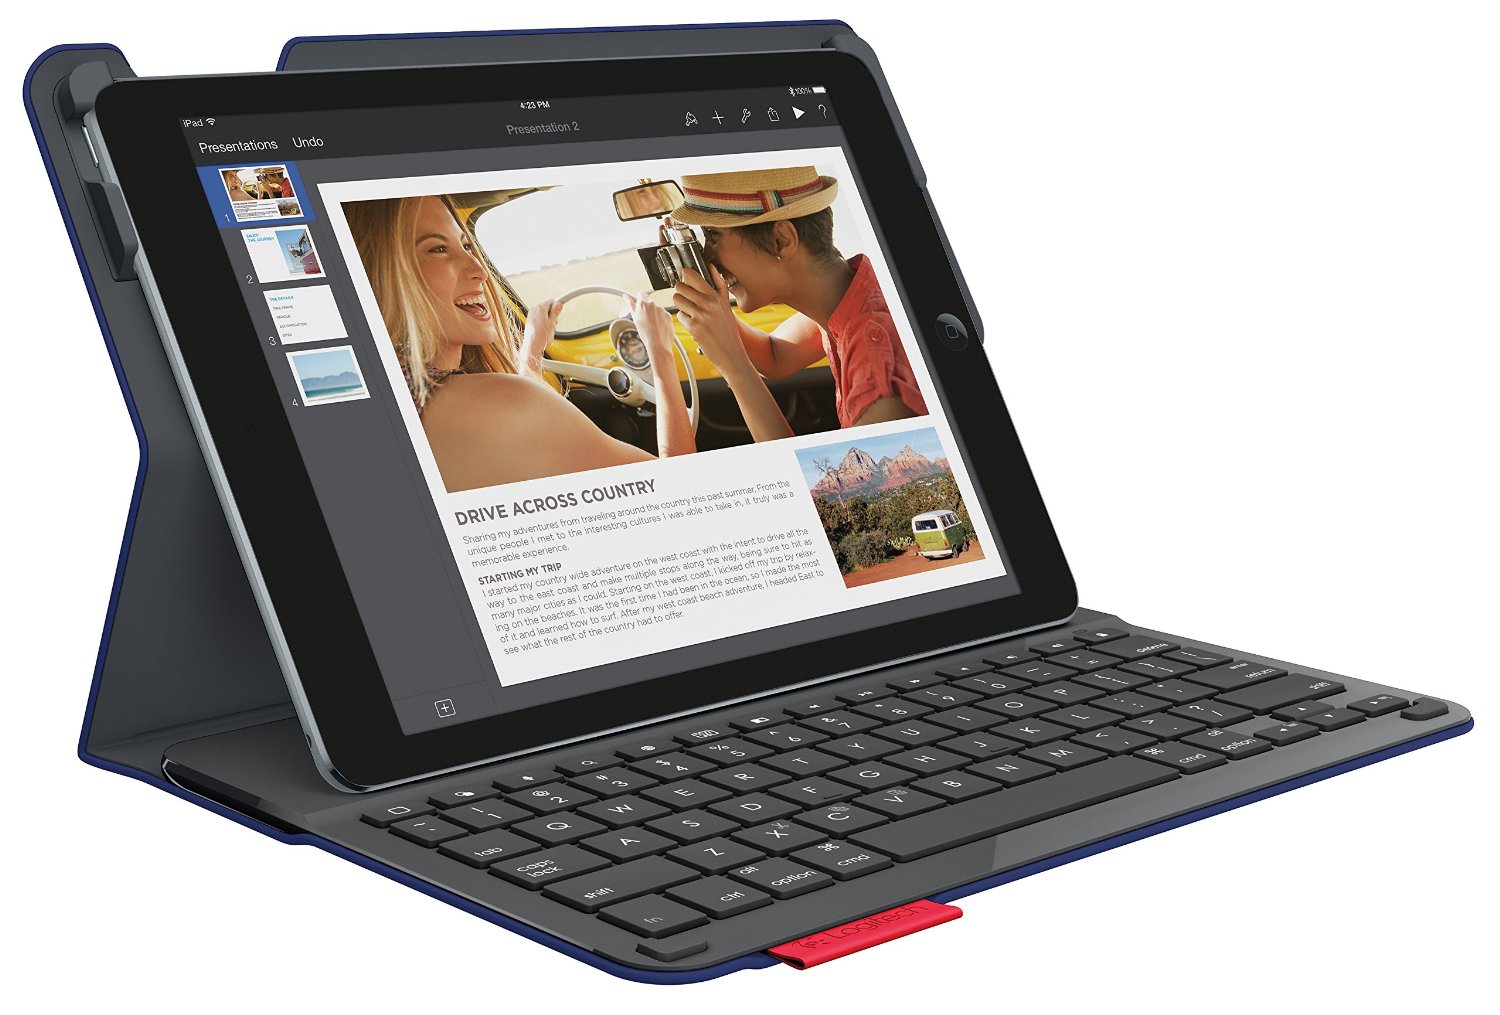 Best keyboard cases for iPad Air 2